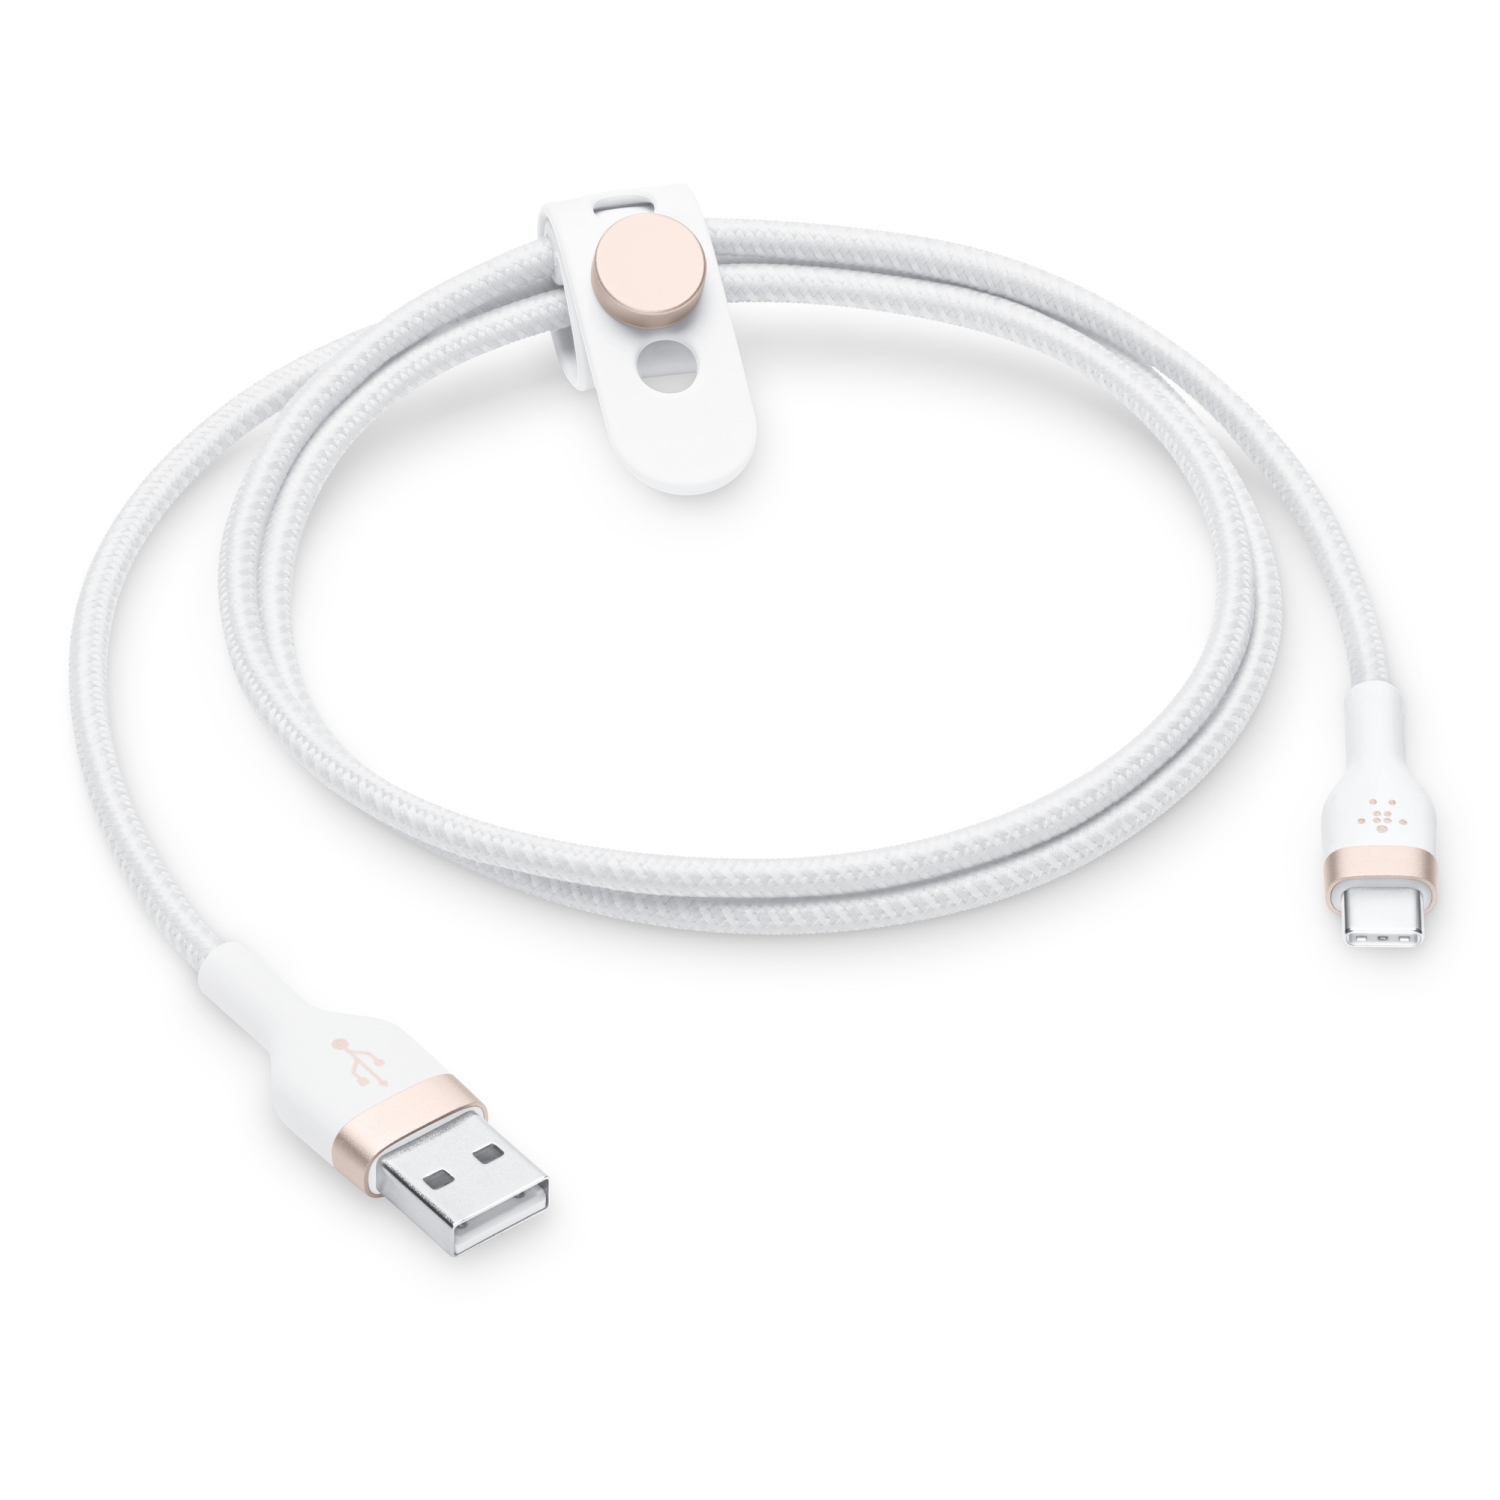 Apple's finally selling a USB-A cable so iPhone 15 buyers can